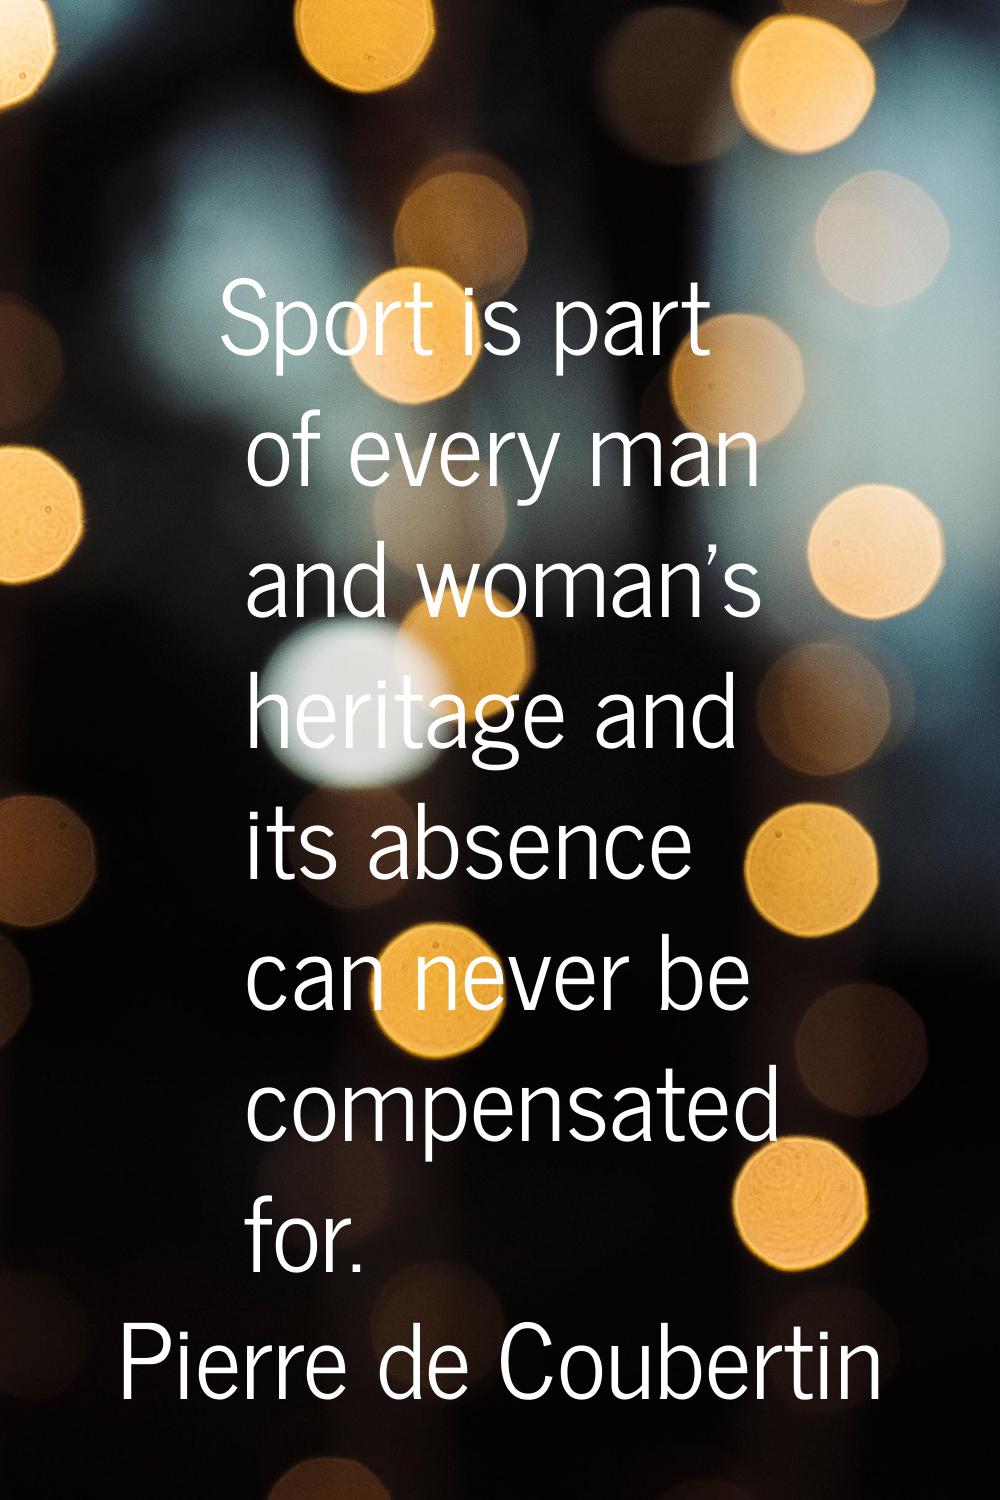 Sport is part of every man and woman's heritage and its absence can never be compensated for.